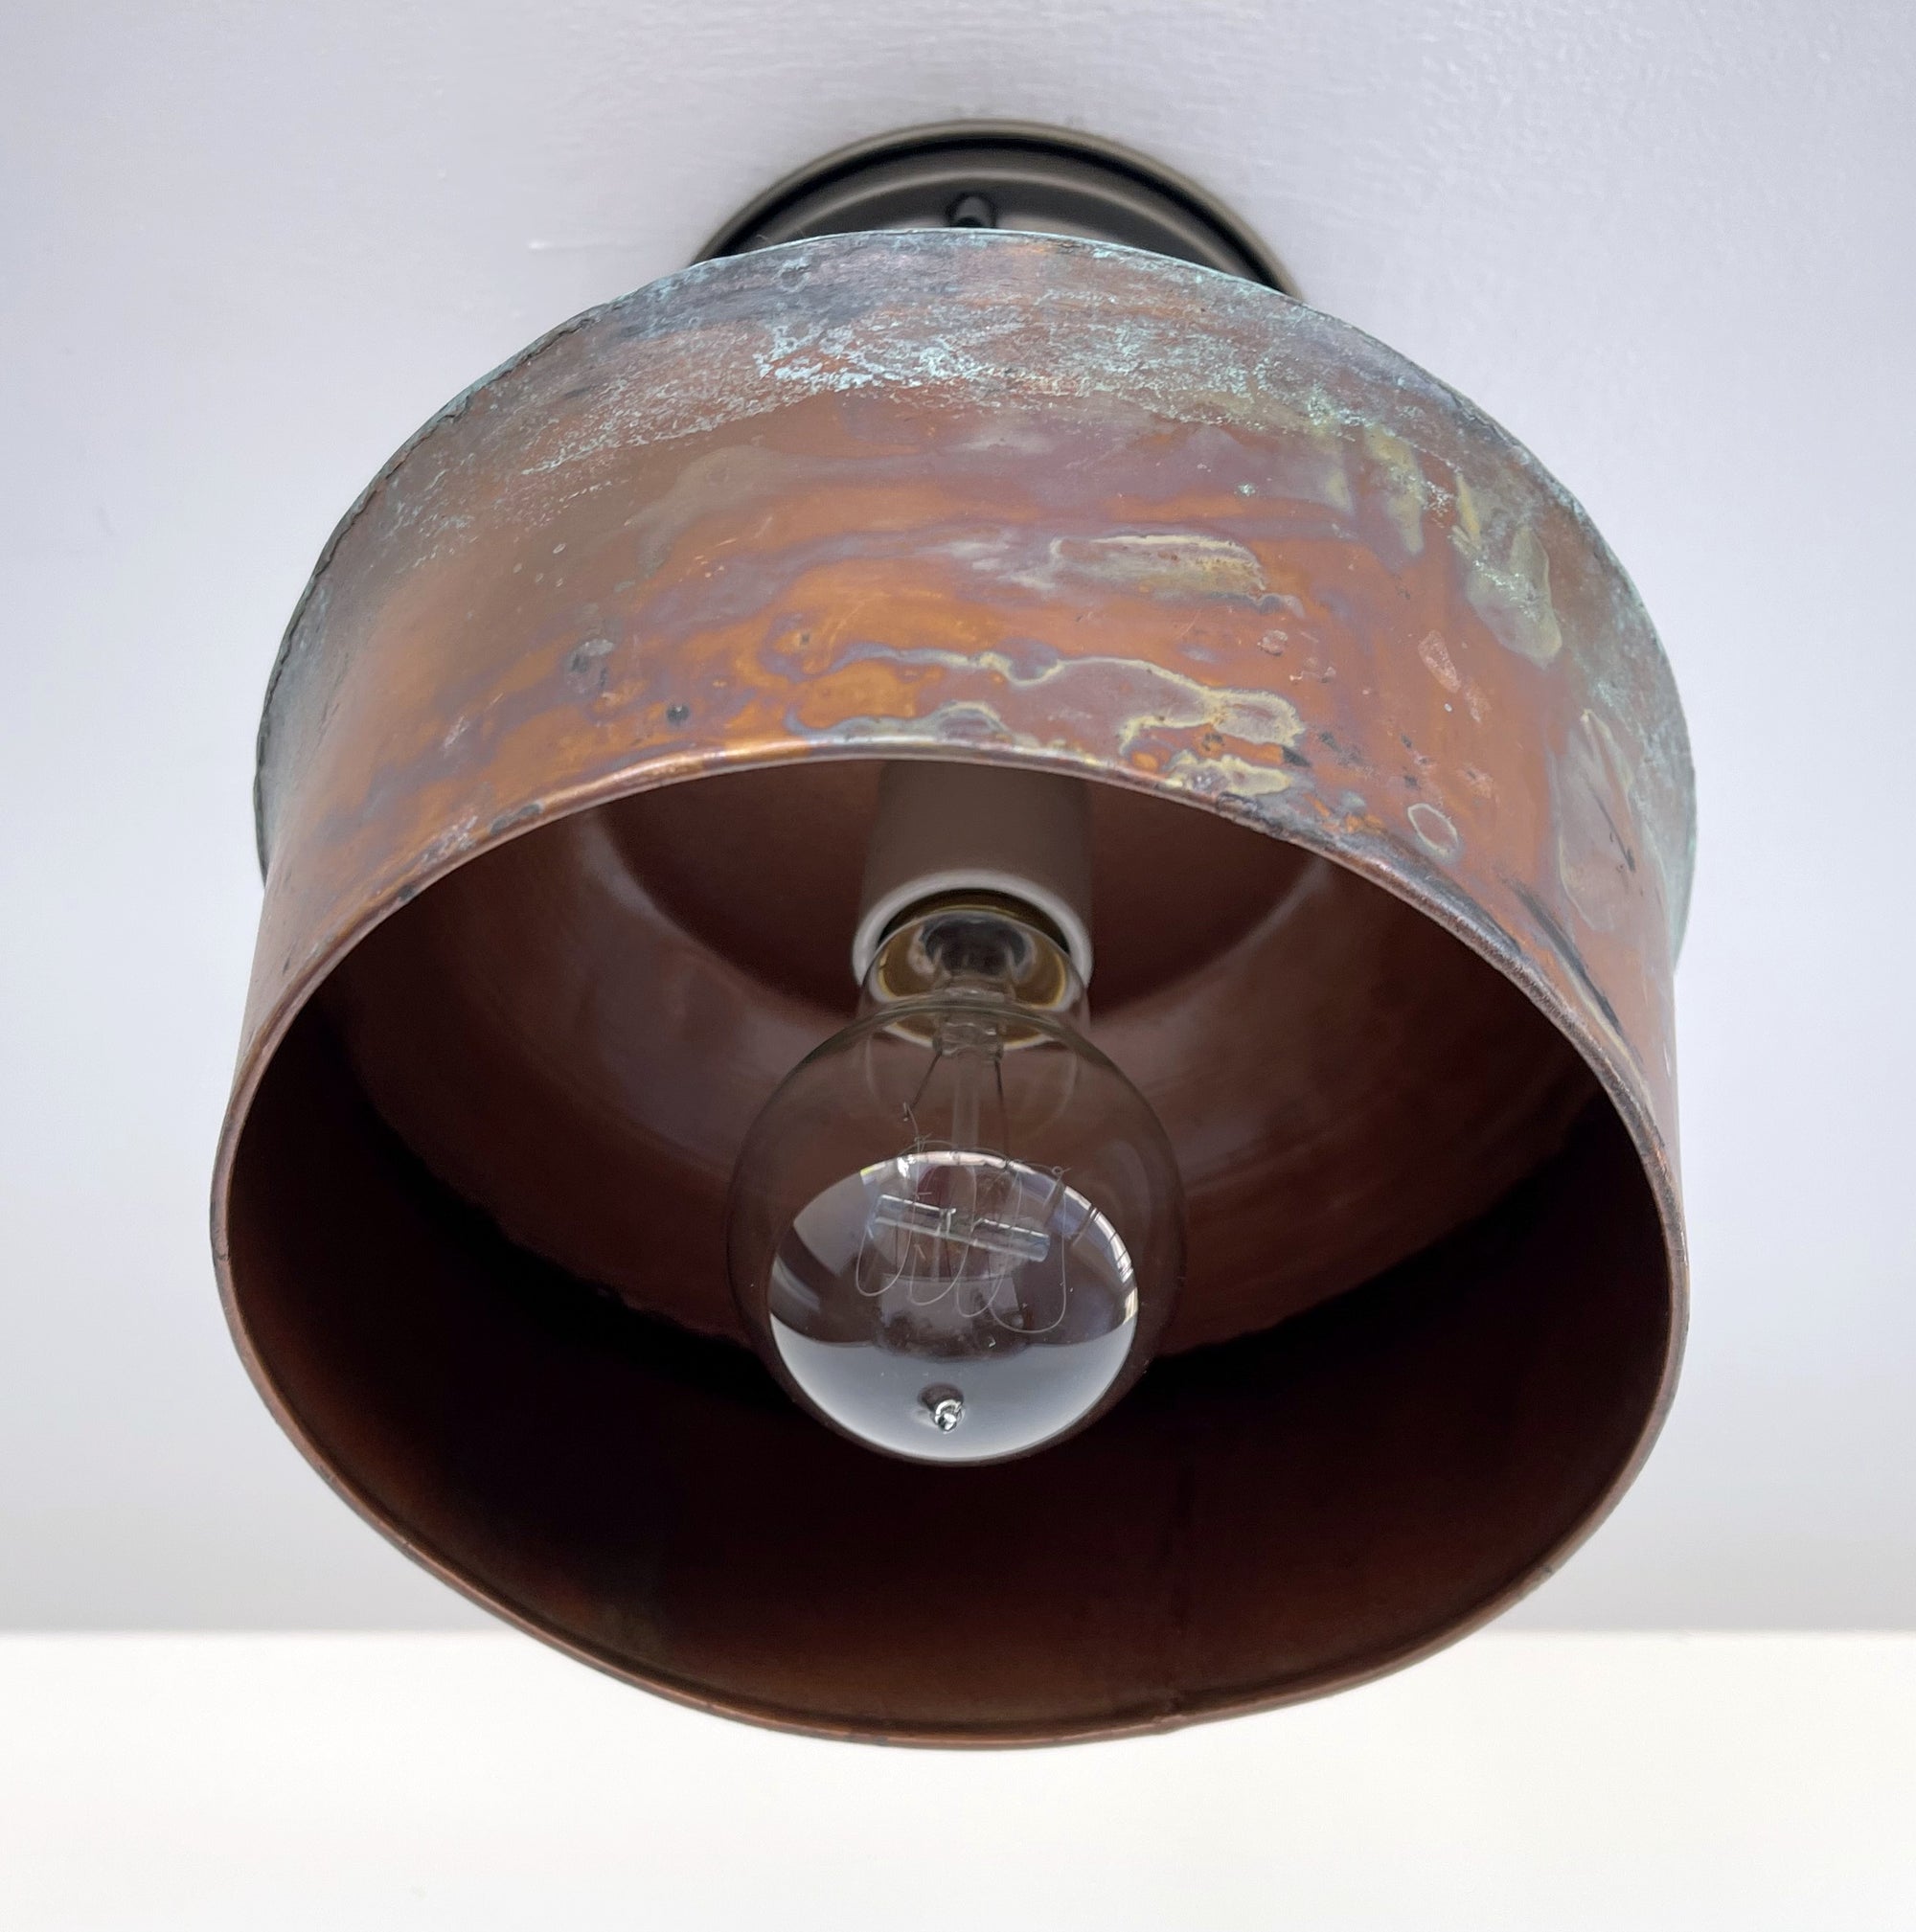 PREORDER- Handcrafted Copper Farmhouse Ceiling Light *Ships after June 1st*